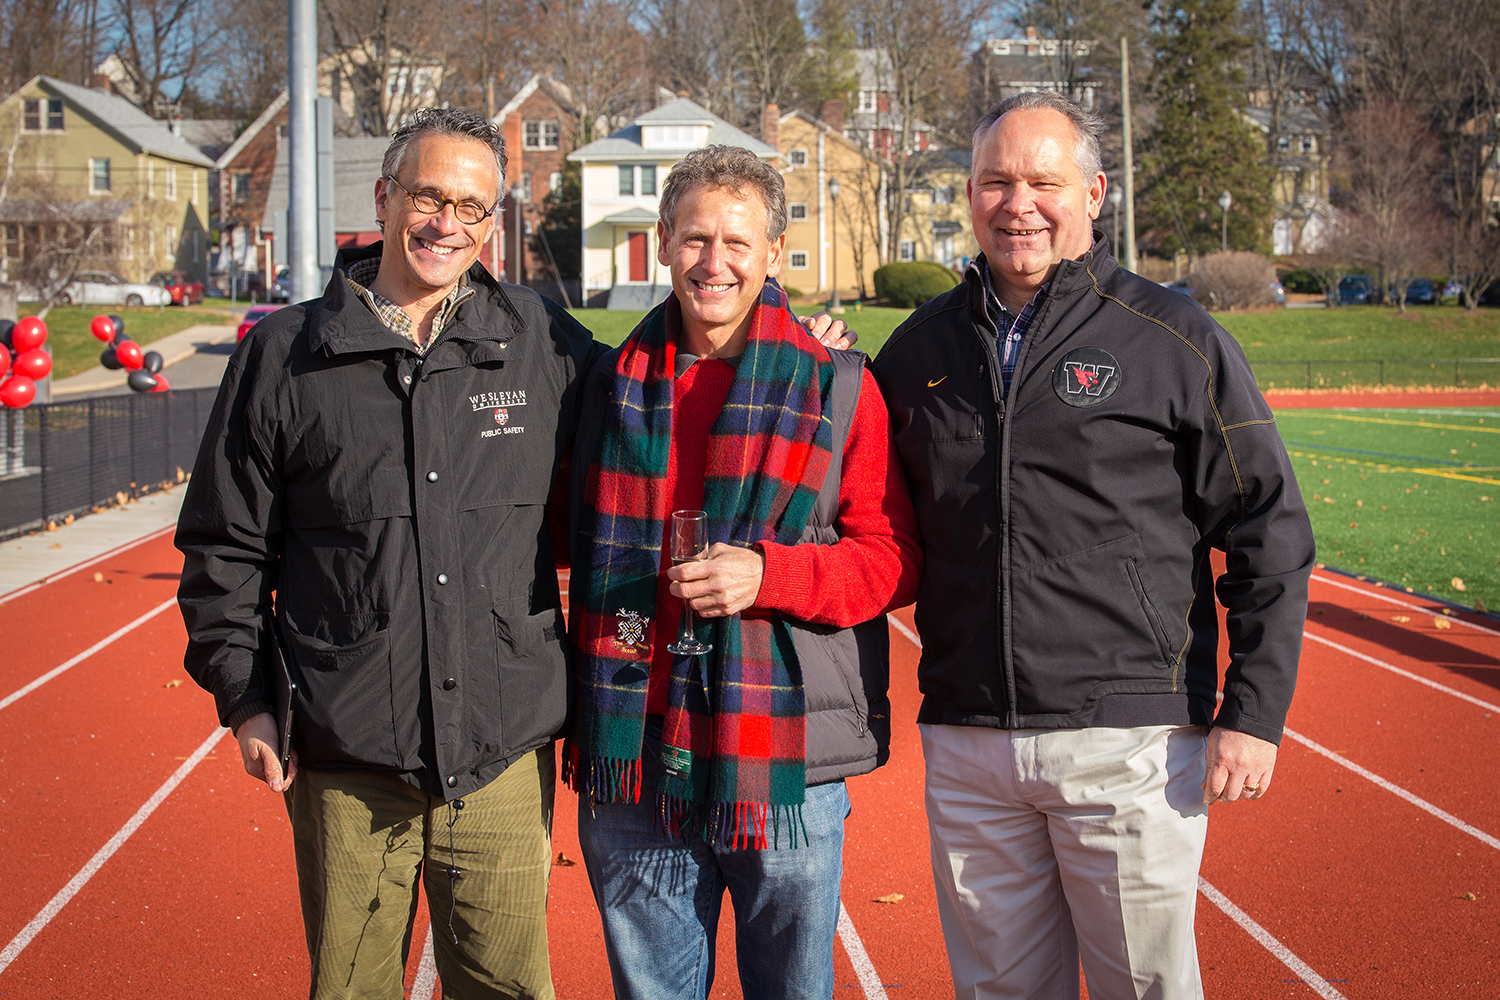 Jim Citrin P'12, P'14, in center, spoke on behalf of the Citrin family with President Michael Roth, at left, and Athletics Director Mike Whalen '83, at right. Jim Citrin's son, Teddy Citrin '12, was a high-scoring, four-year letterman in men's lacrosse, racking up 76 goals and 13 assists for 89 scoring points while helping the Cardinals post a record of 42-23 from 2009-12. His other son, Oliver Citrin '14, was a outstanding fan and men's lacrosse team photographer during his Wesleyan years.